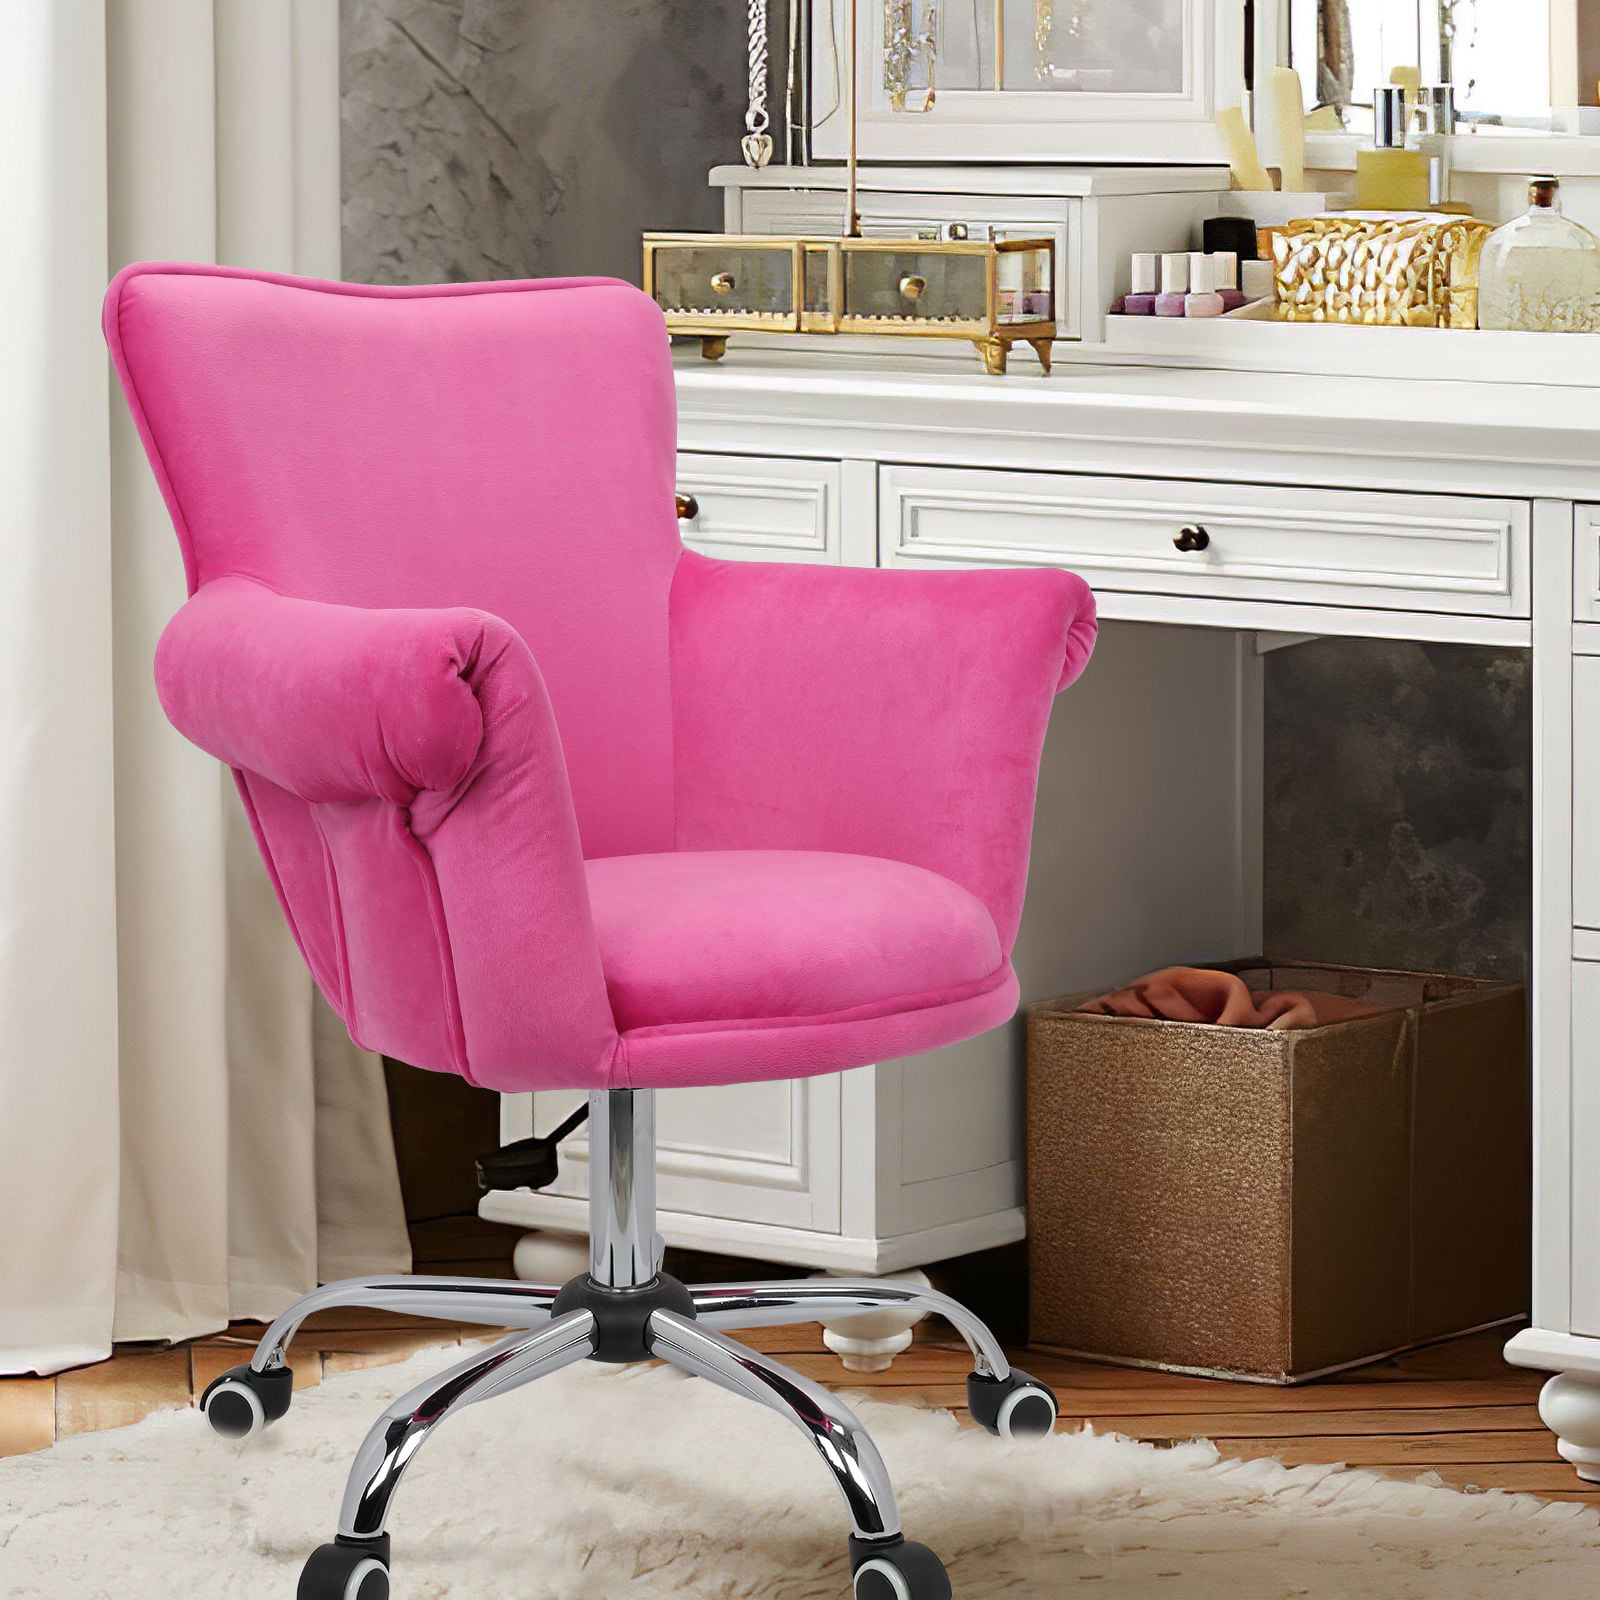 Magshion Deluxe Microfiber Office Desk Chair Bar stool Beauty Nail